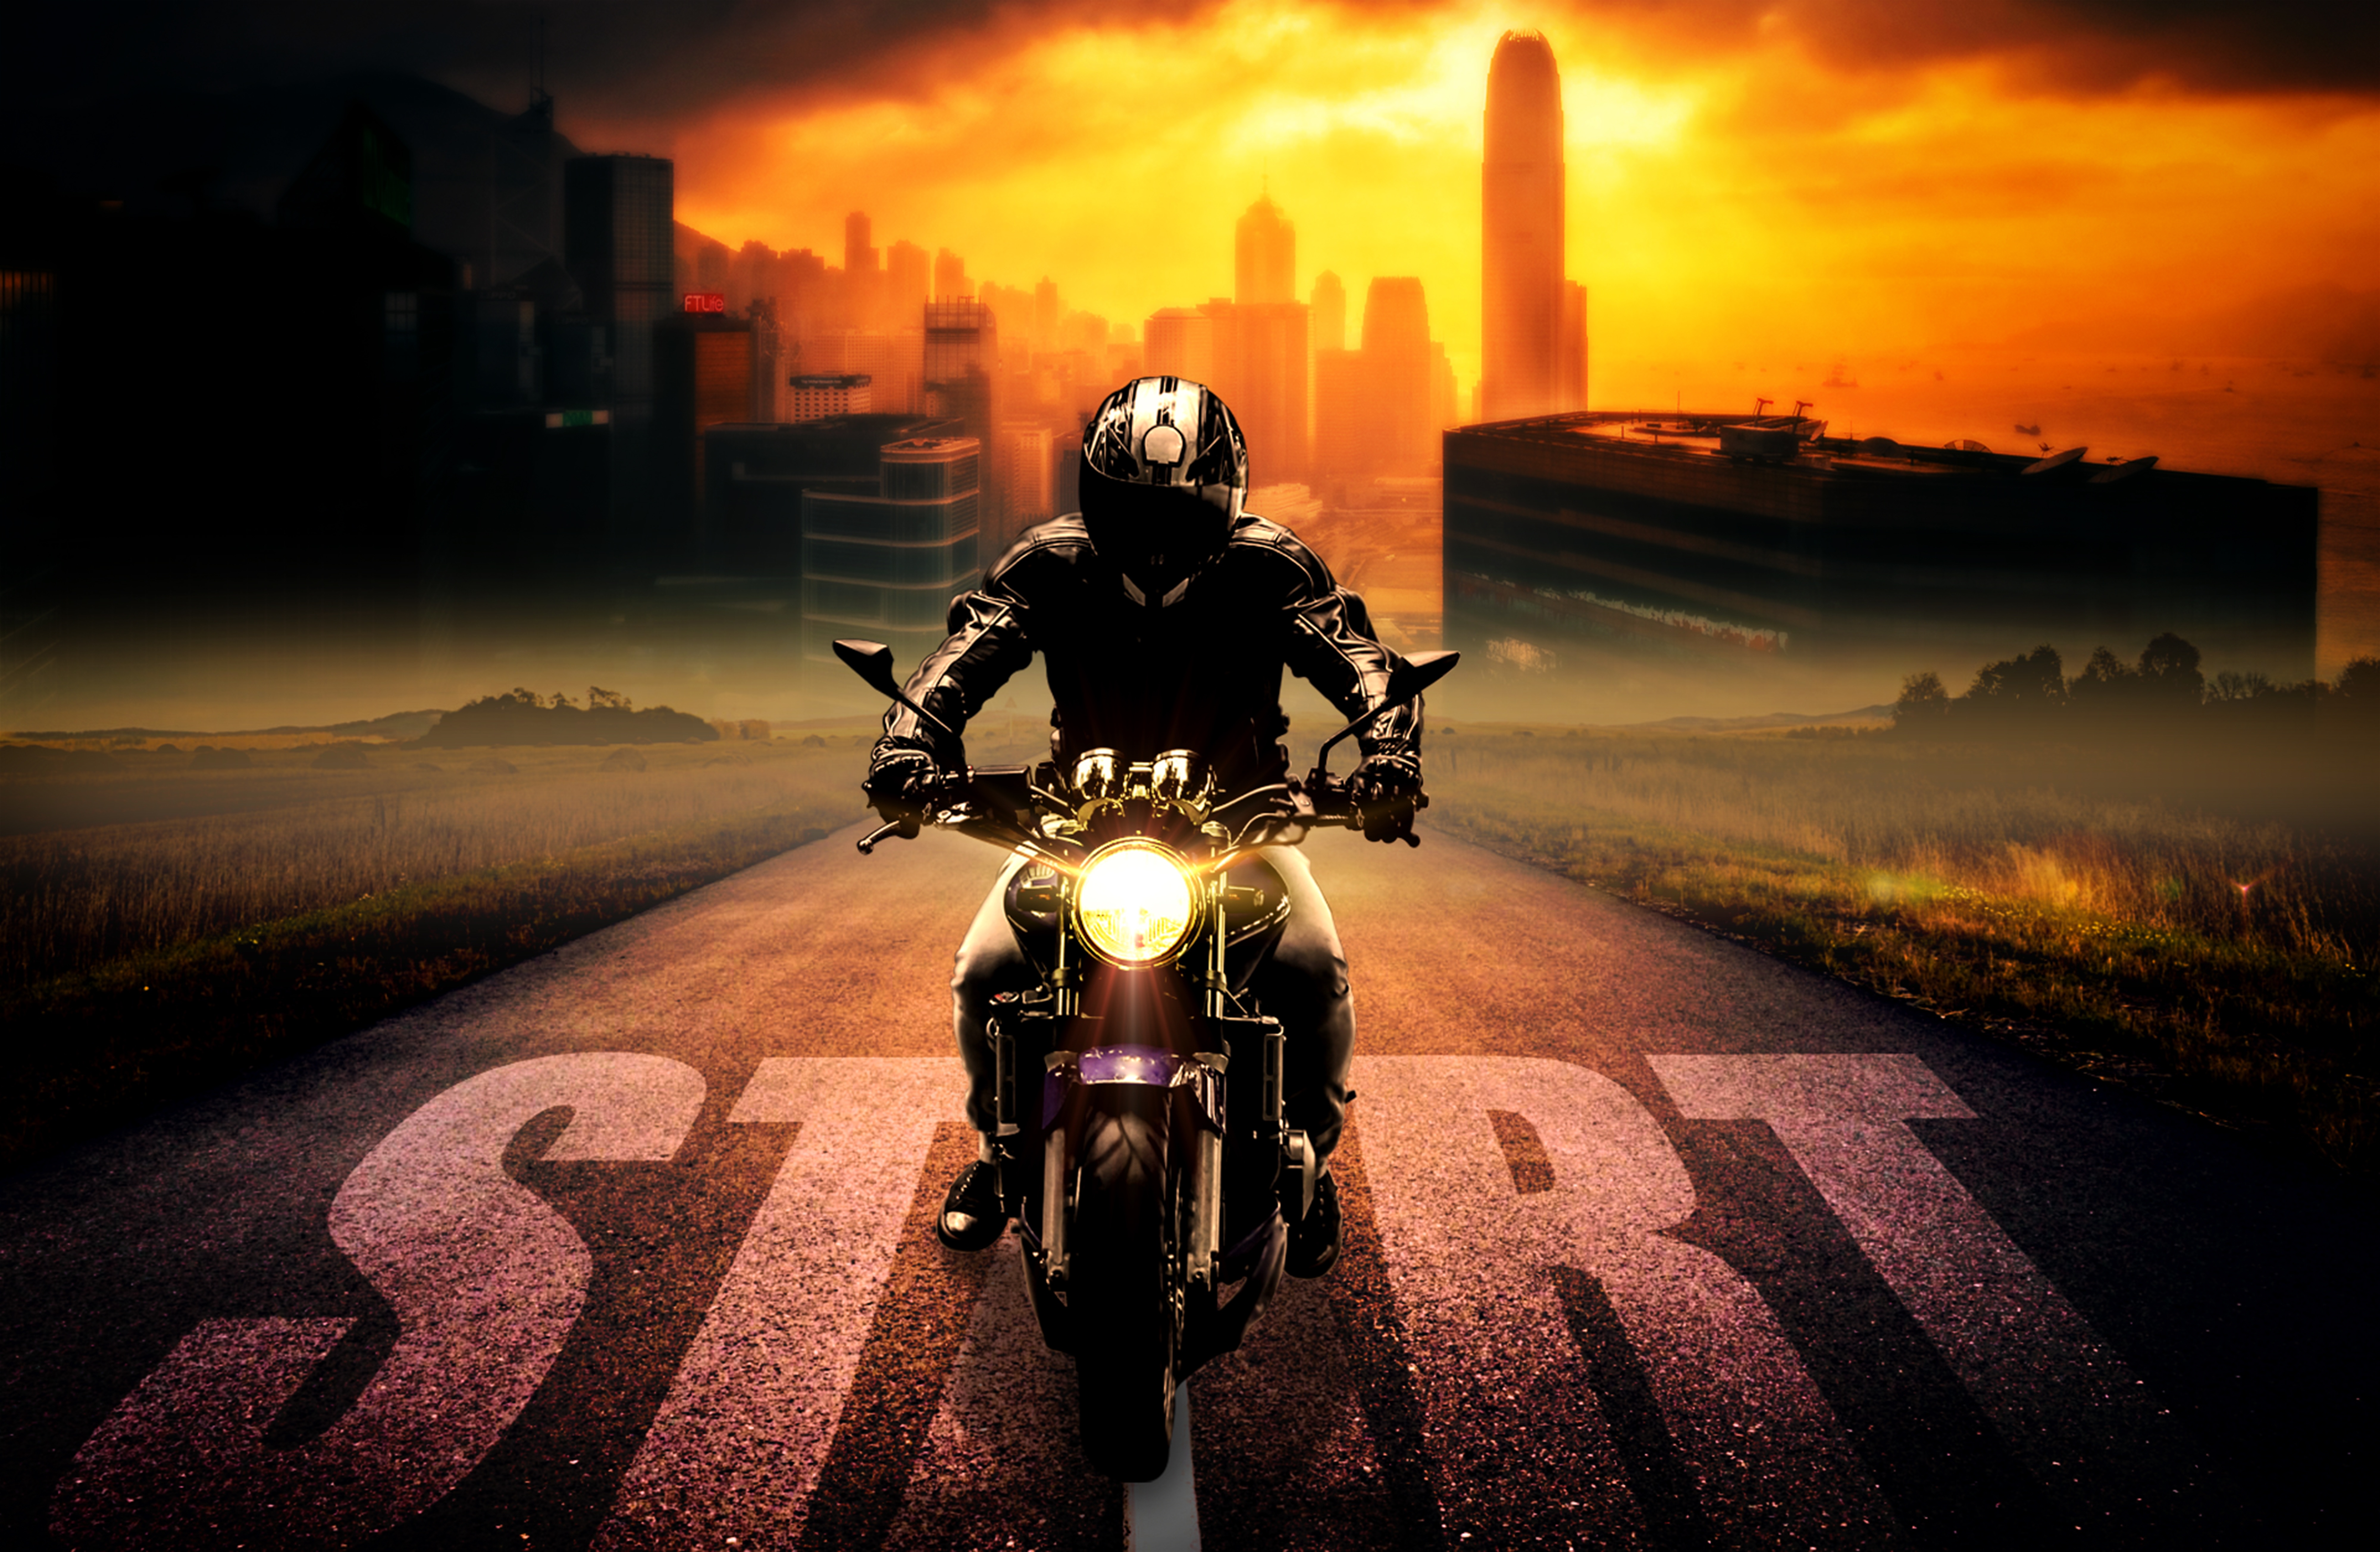 135510 Screensavers and Wallpapers Motorcyclist for phone. Download motorcycles, motorcyclist, motorcycle, bike, photoshop, biker pictures for free